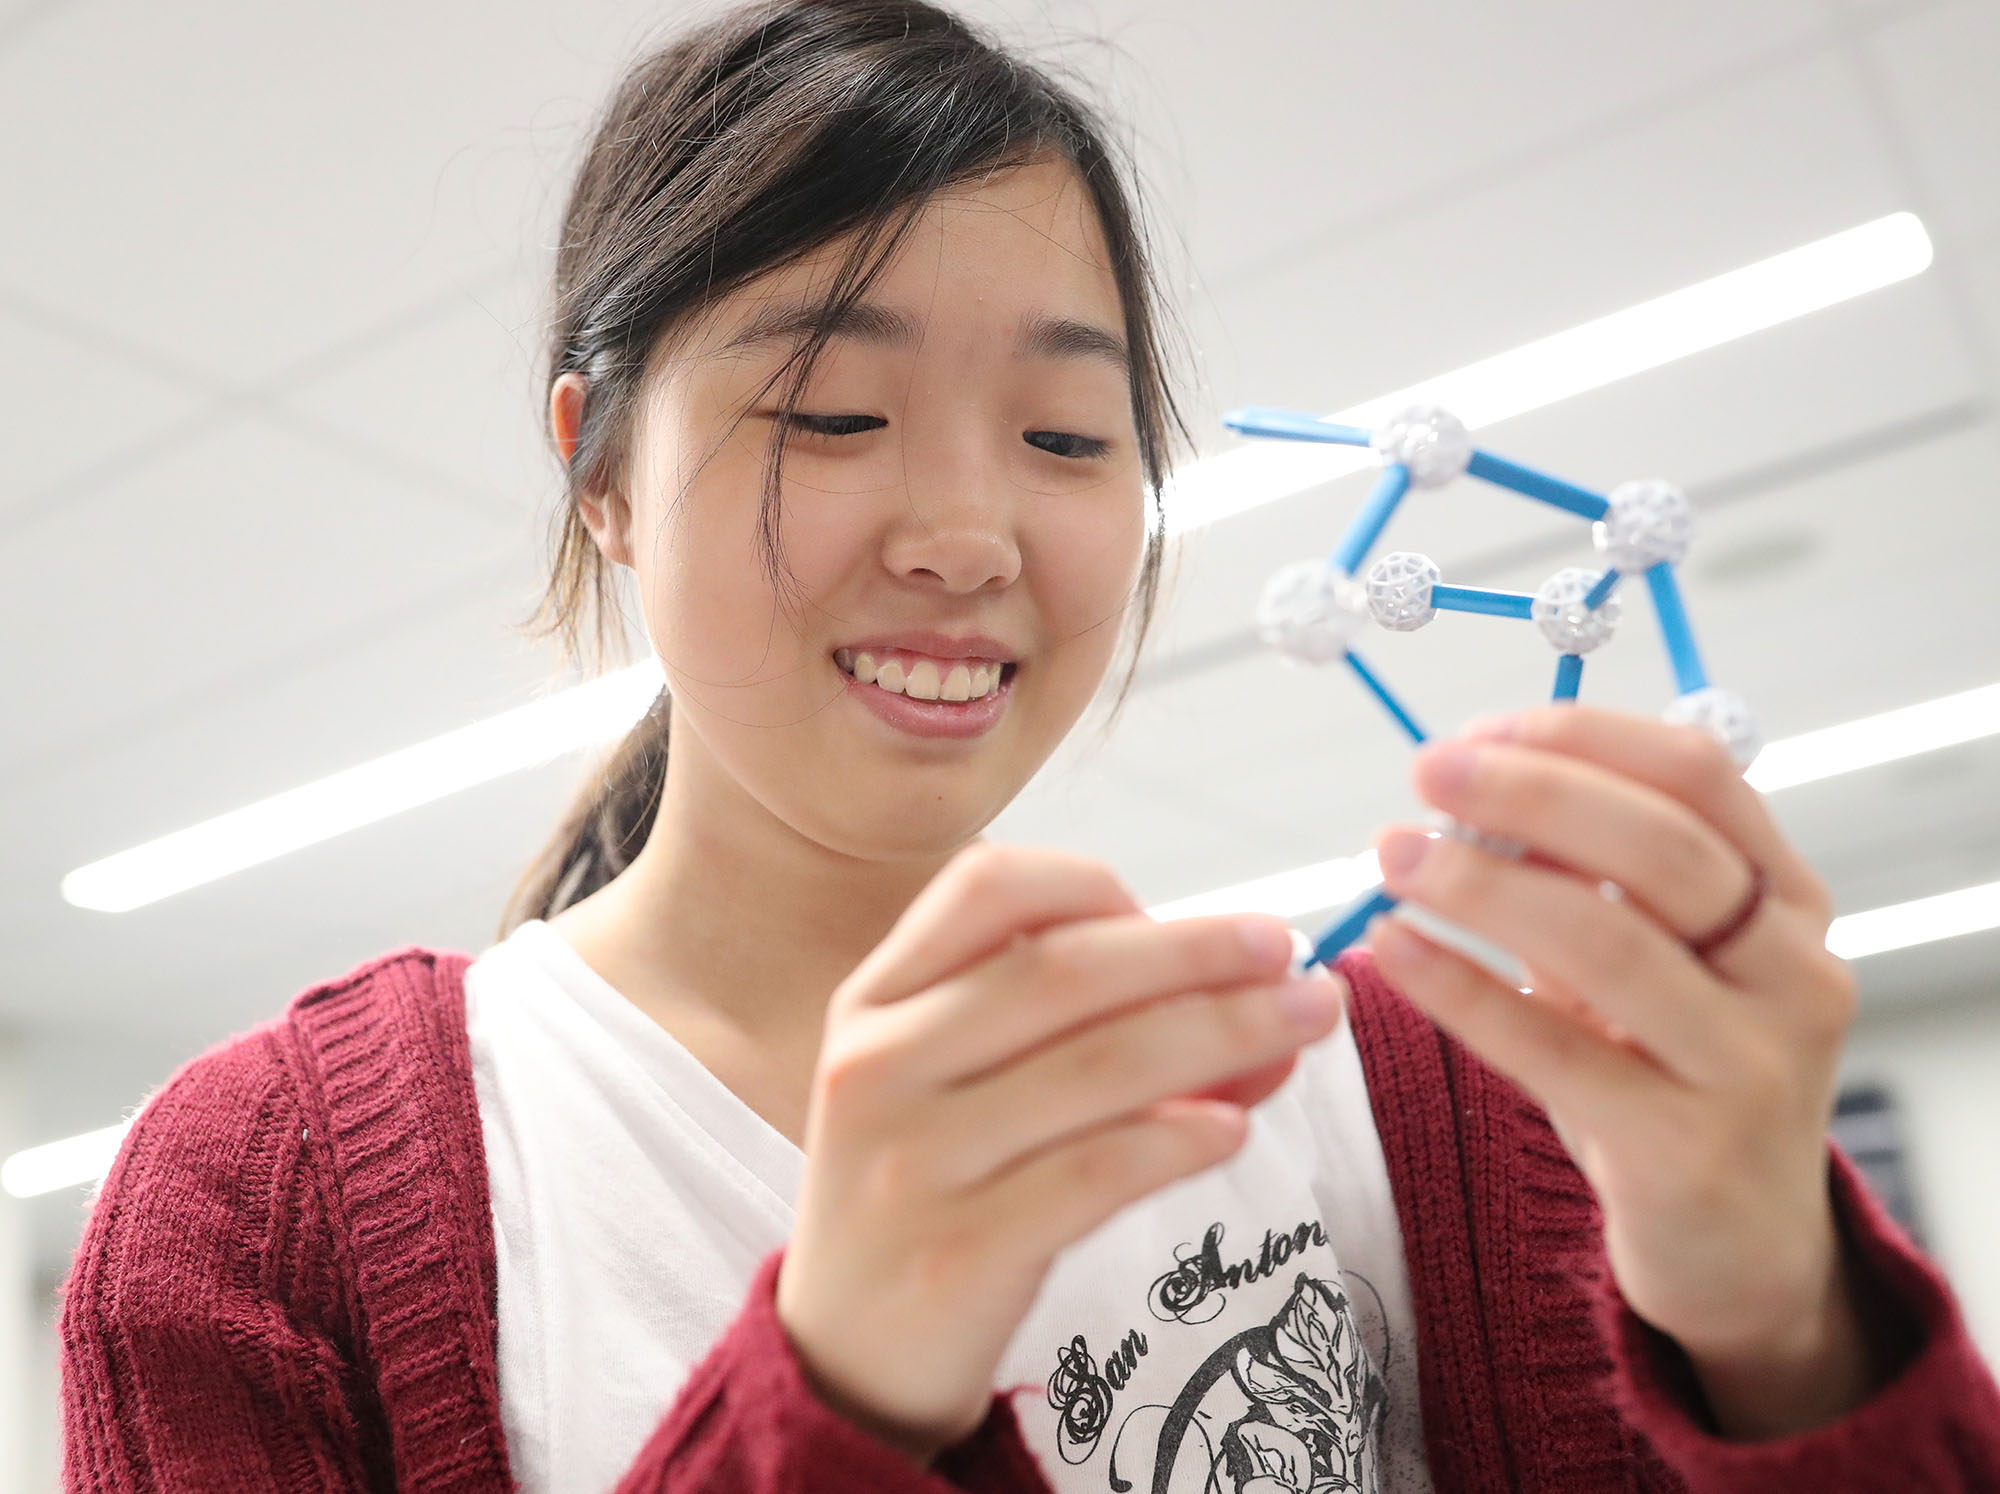 Kearney High School student Isabella Cao works on an activity Friday during an event hosted by UNK’s Department of Mathematics and Statistics. Students from Kearney and Scottsbluff also participated in a math-themed scavenger hunt on campus.